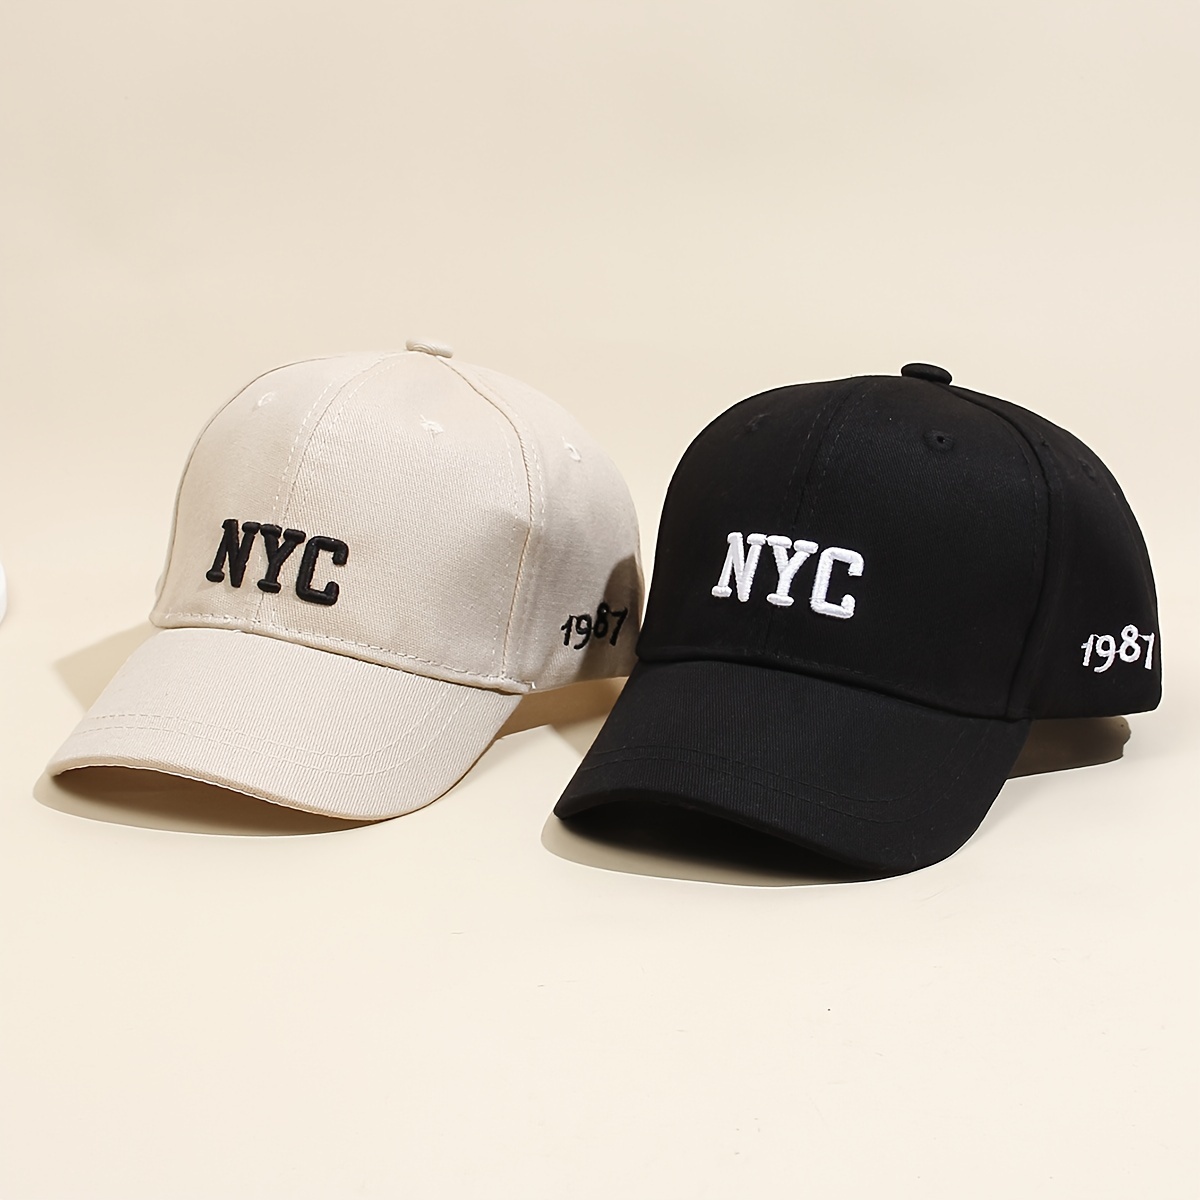 

1pc Children's Nyc Number Embroidery Baseball Cap, Suitable For Daily Outings, For 6-8 Years Old